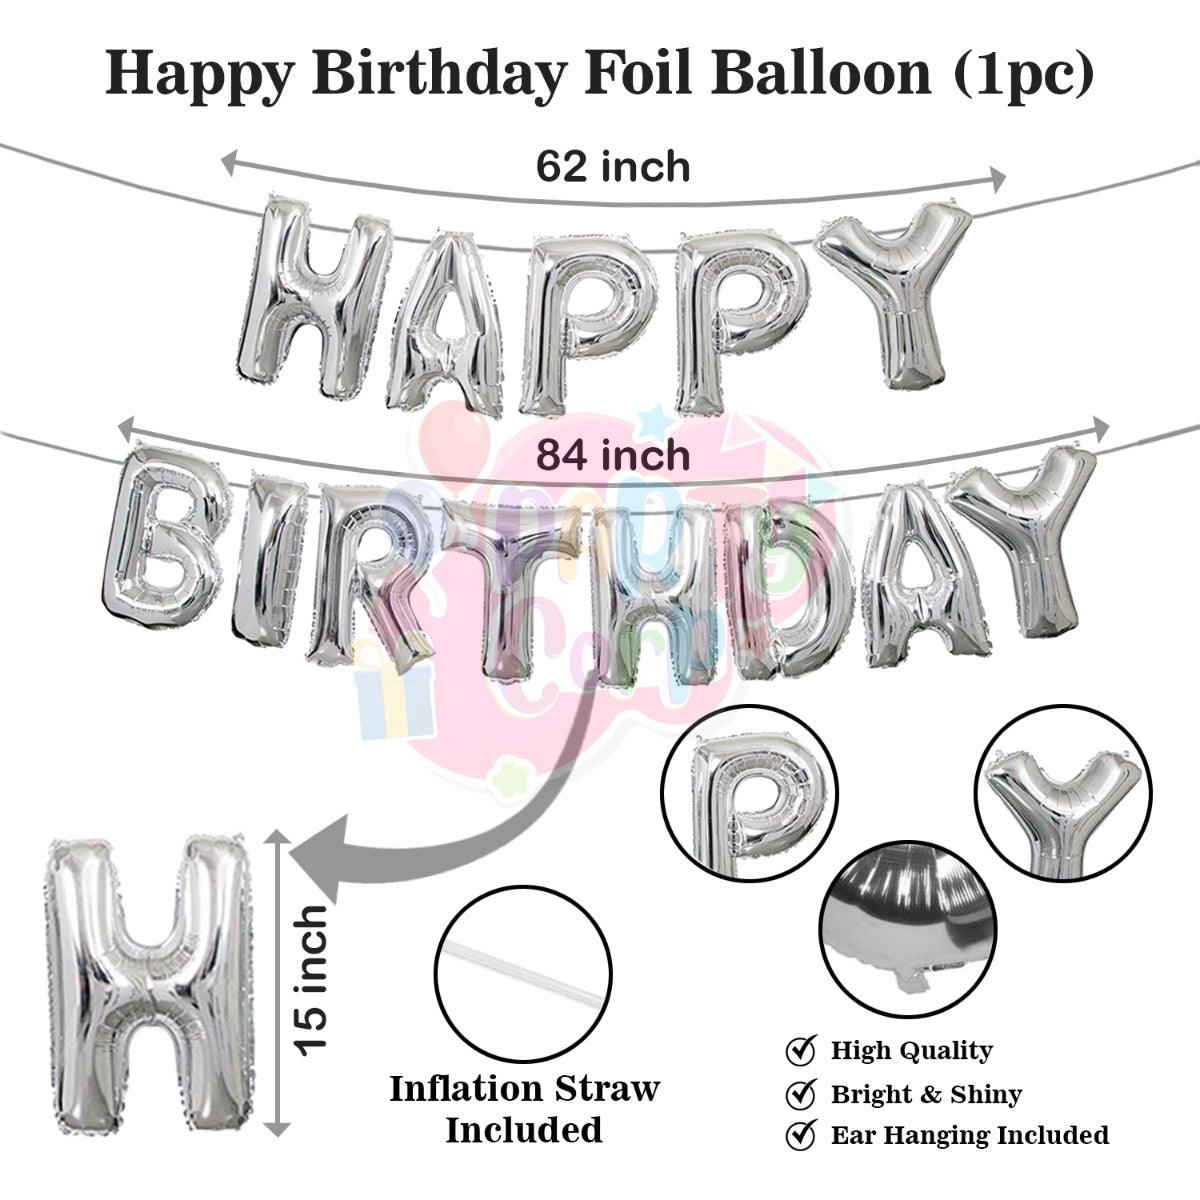 PartyCorp Happy Birthday Decoration Kit Combo 82 Pcs - Gold & Silver Chrome Balloons, Silver Happy birthday Foil Balloon Banner, Black Square Foil Curtain, Moon & Stars Foil Balloon Bouquet